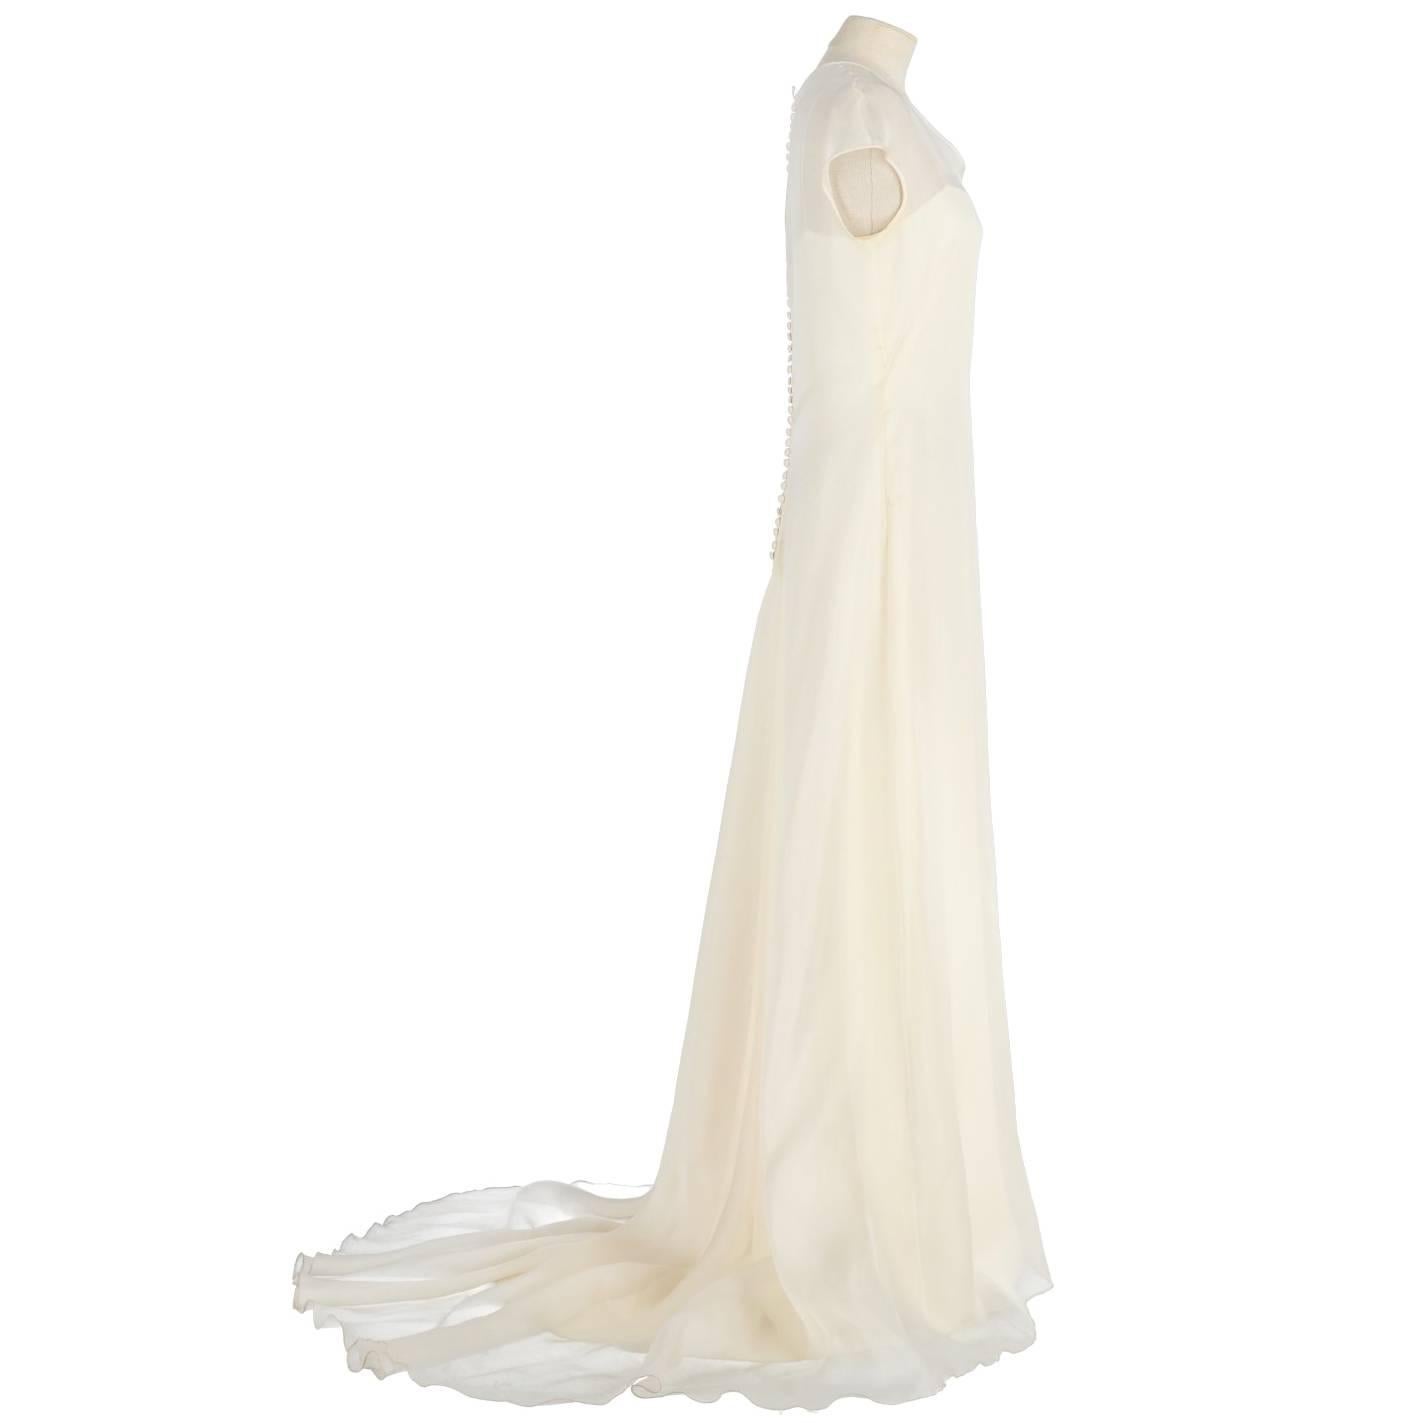 Refined Genny wedding dress in white ivory silk. It features a silk veil dress with short sleeves and buttons closure on the back and a slipdress with super thin shoulder straps. The item is vintage, it was produced in the 90s and is in good